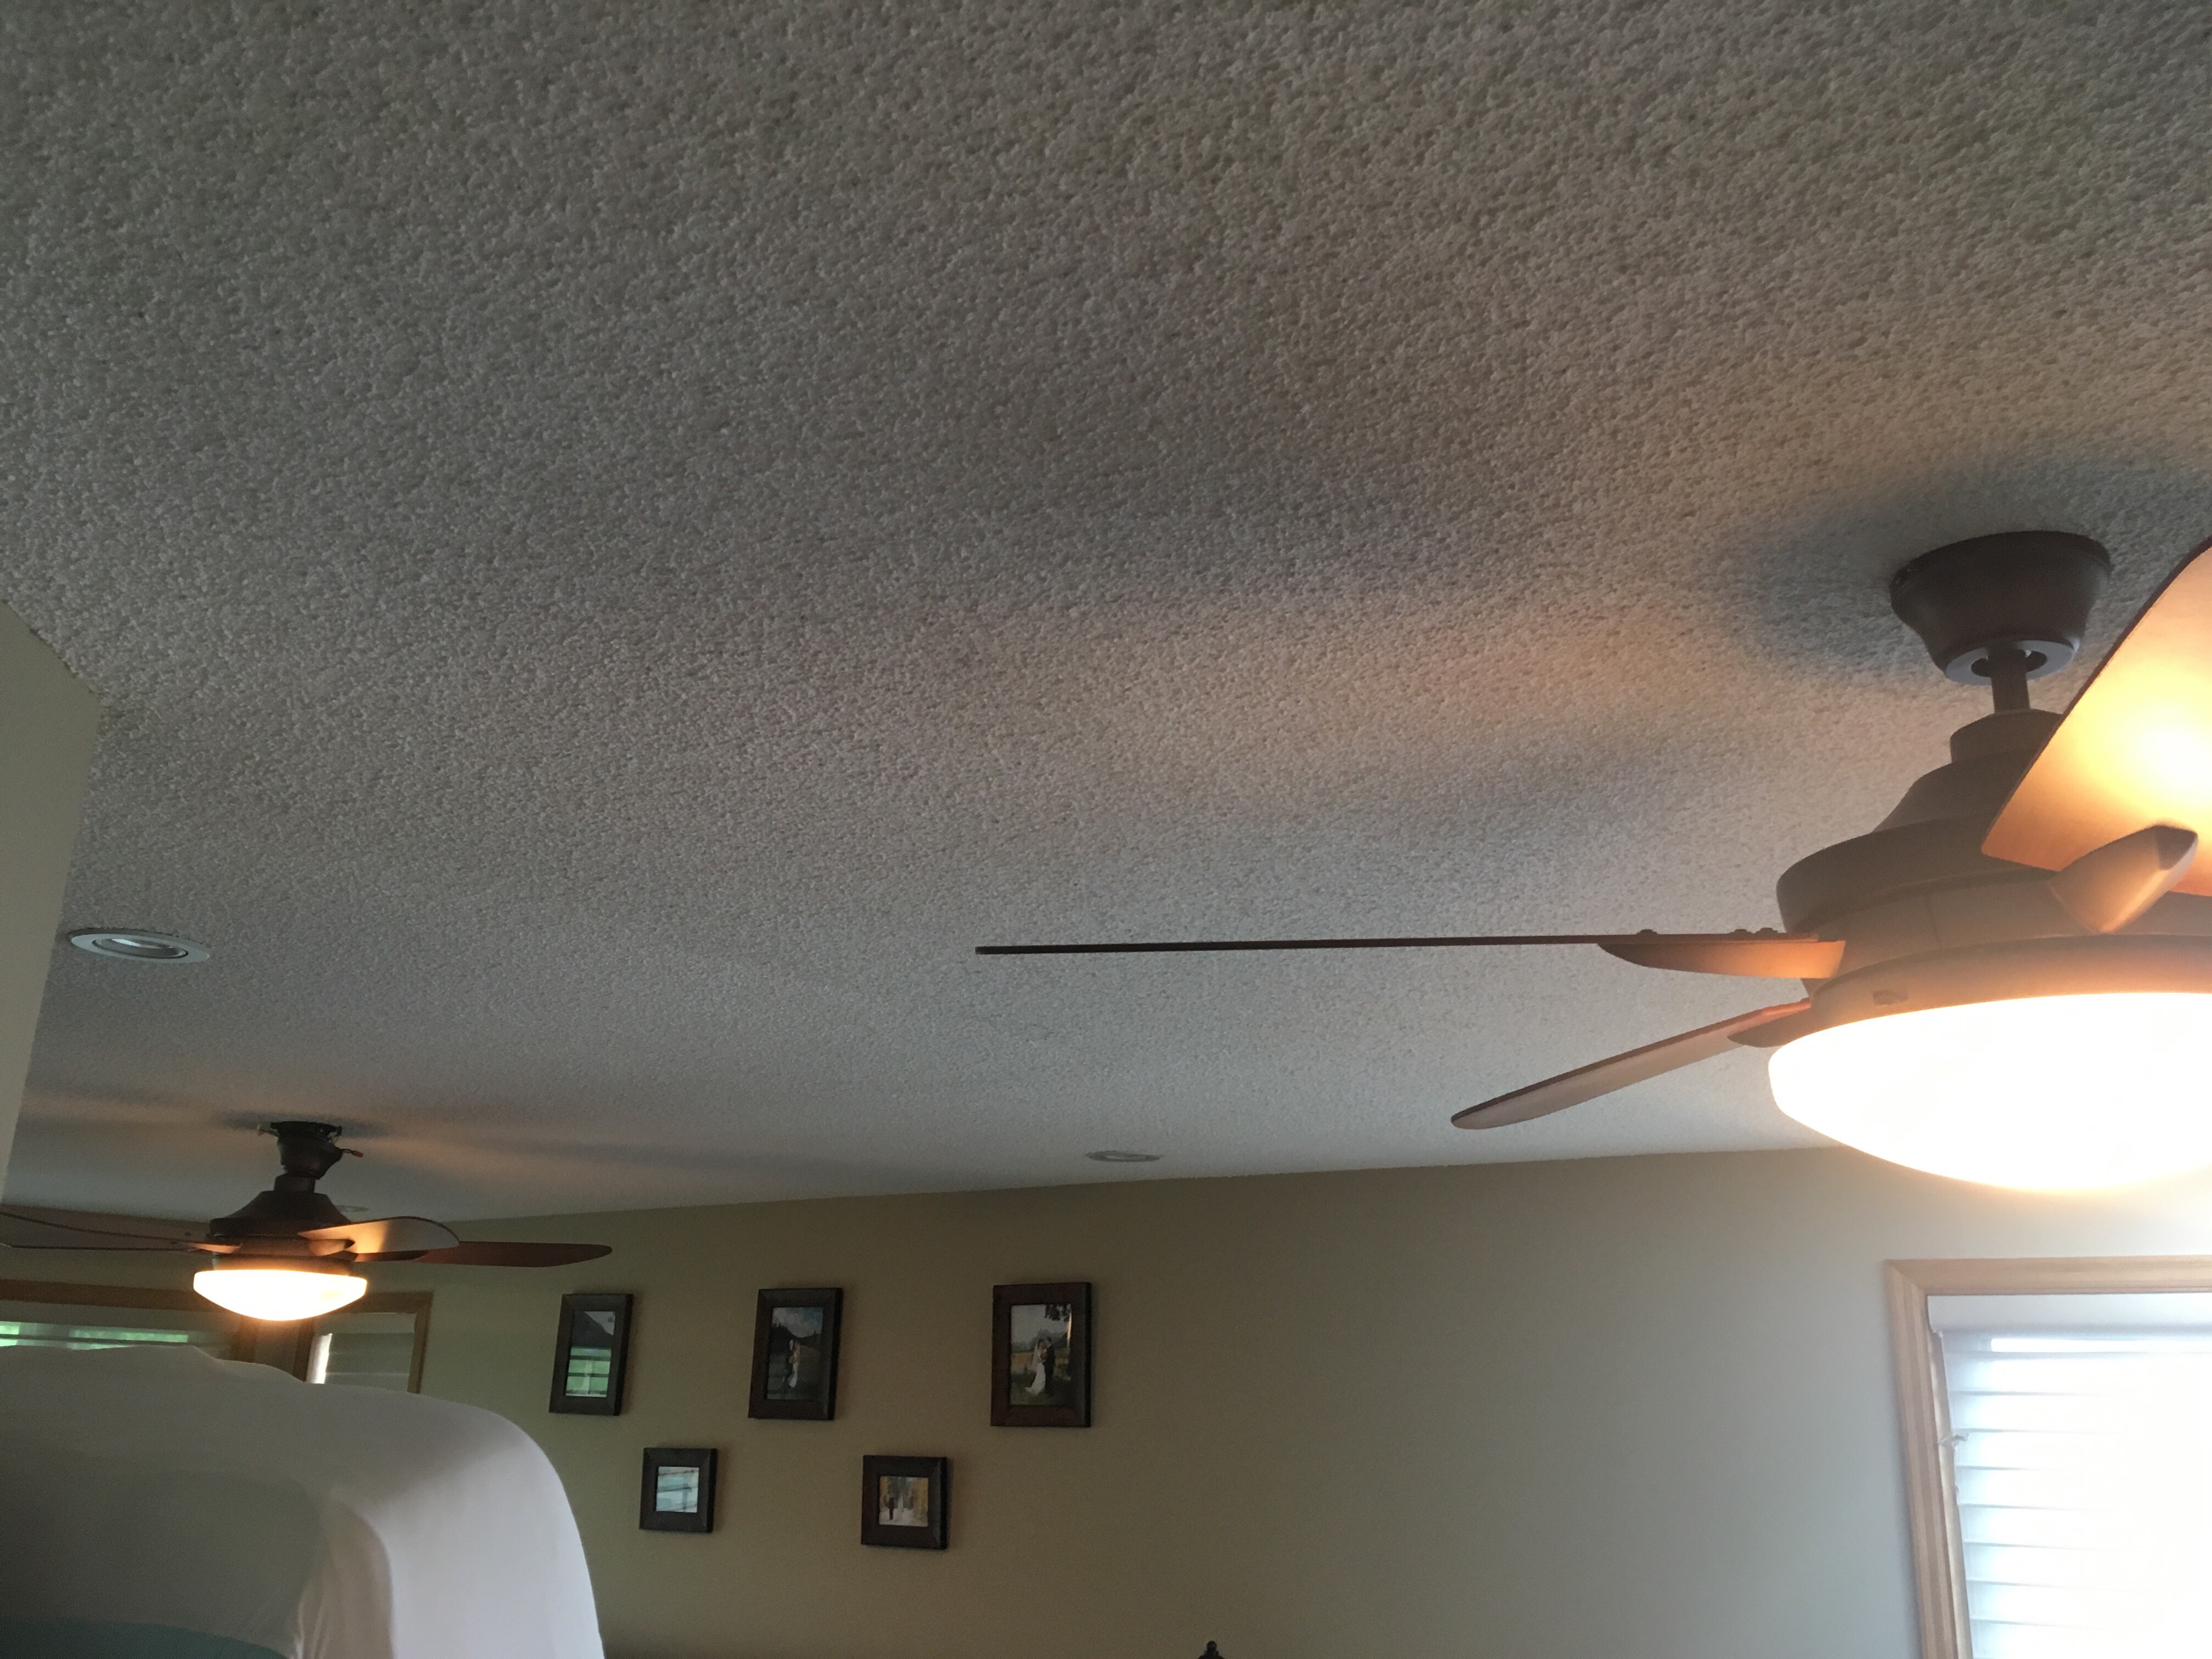 Two Ceiling Fans In One Room Shd, Can You Put Two Ceiling Fans In One Room